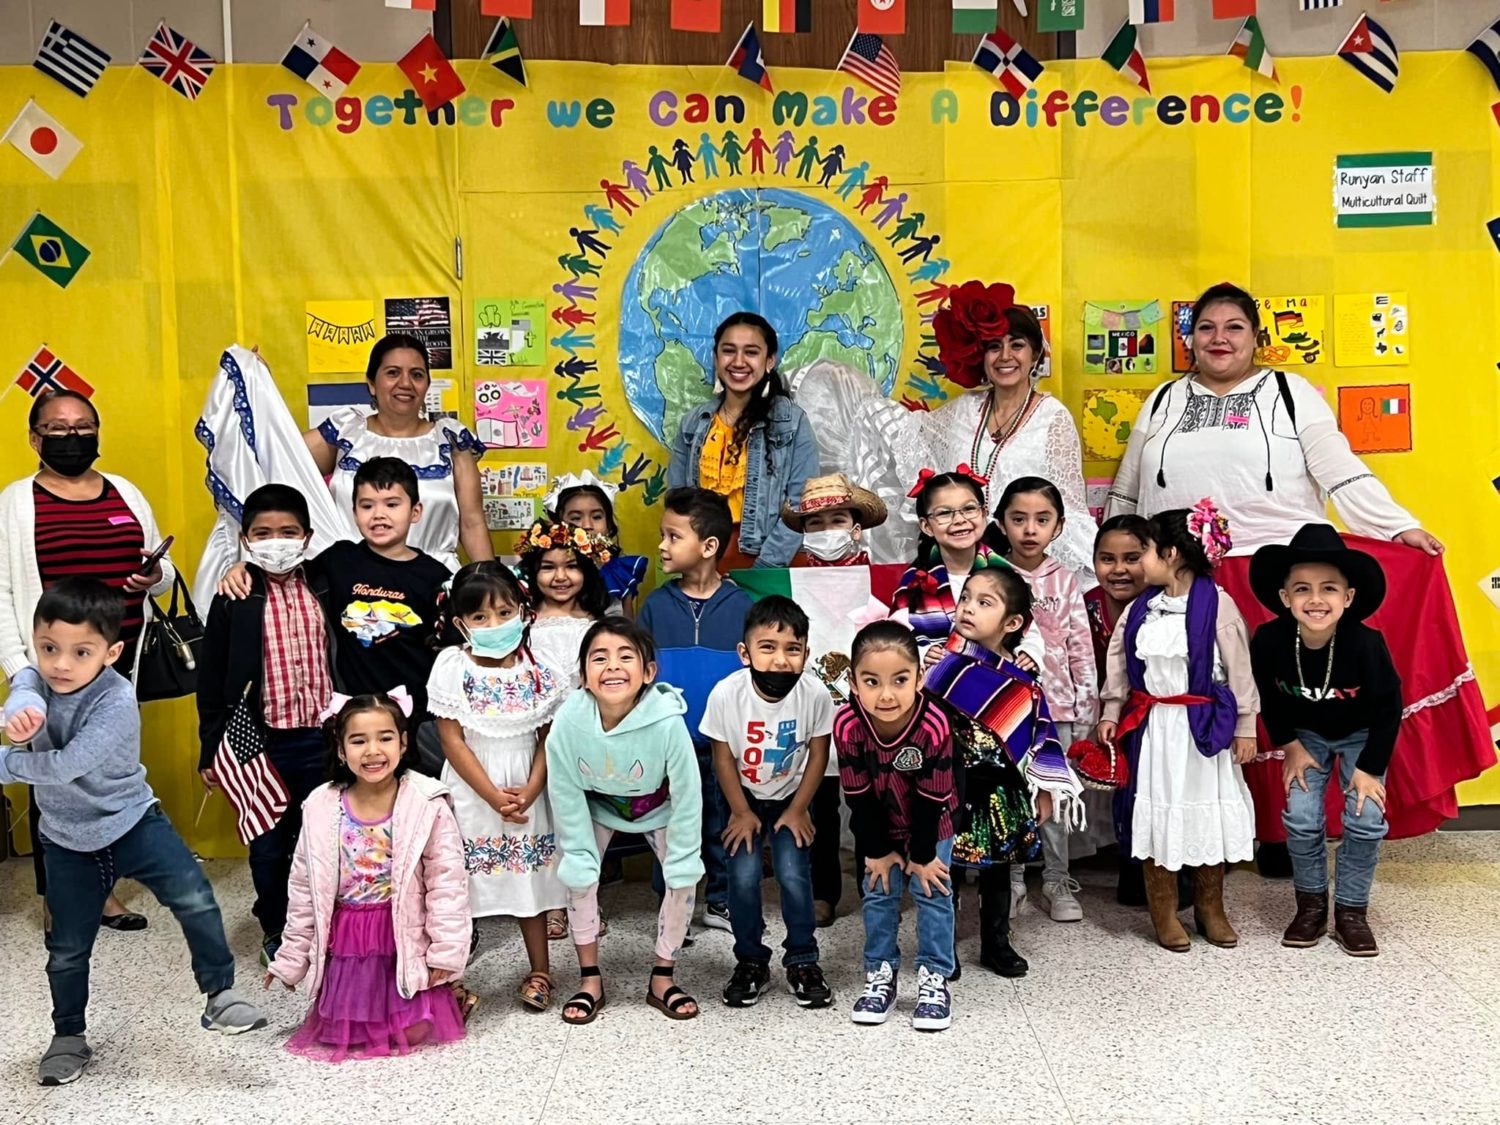 A group of students and staff smile for the camera.